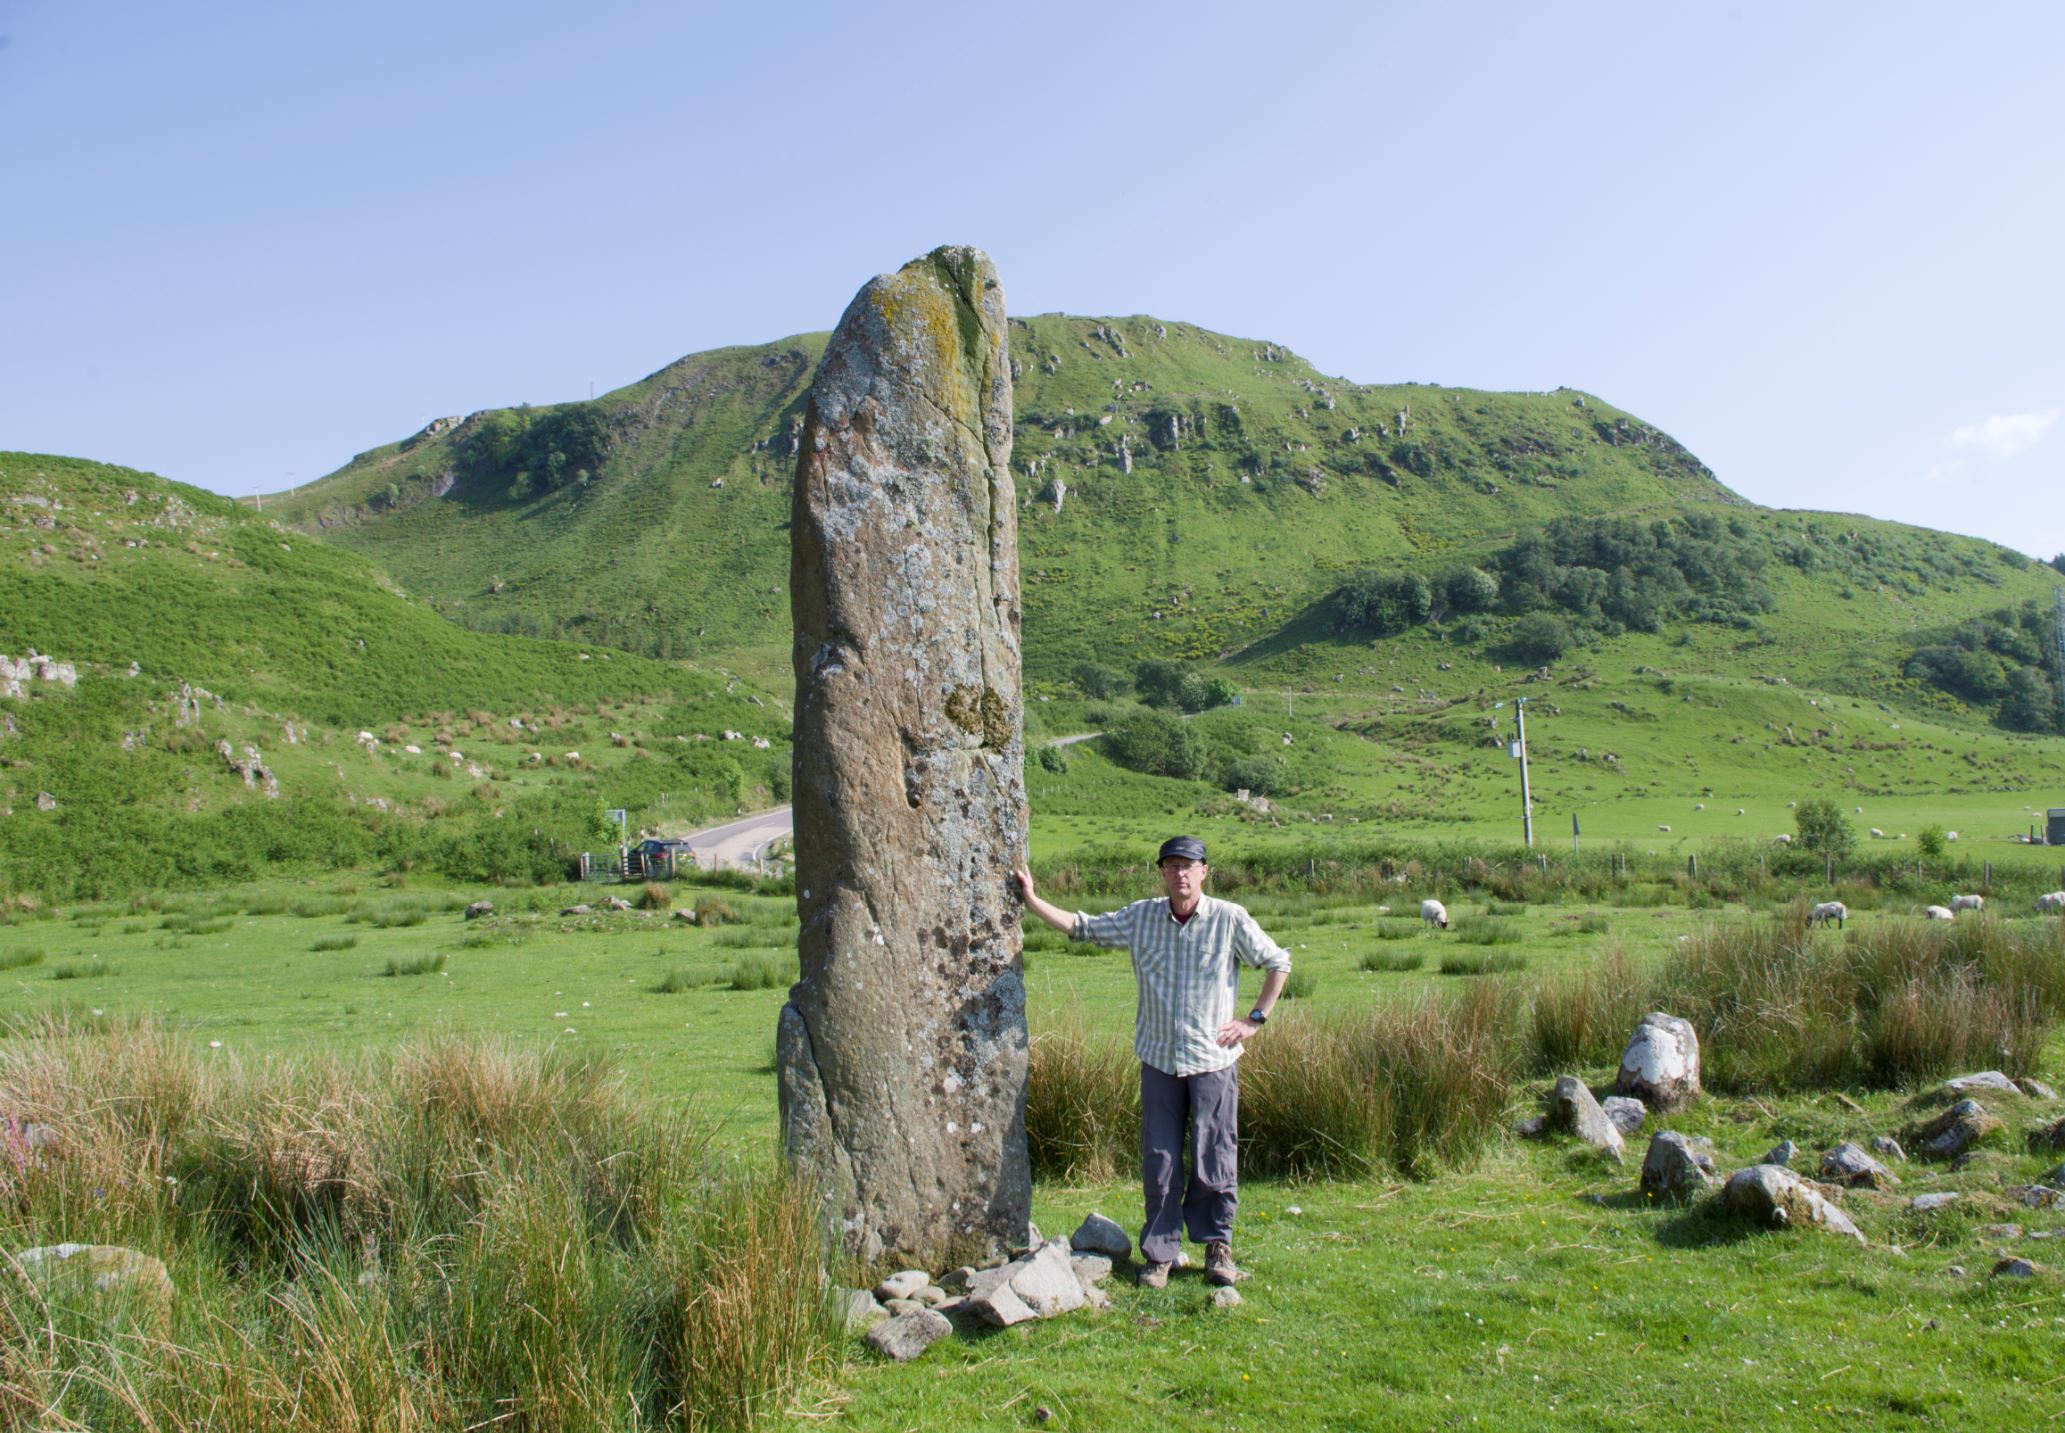 The standing stone at Kintraw, Argyll